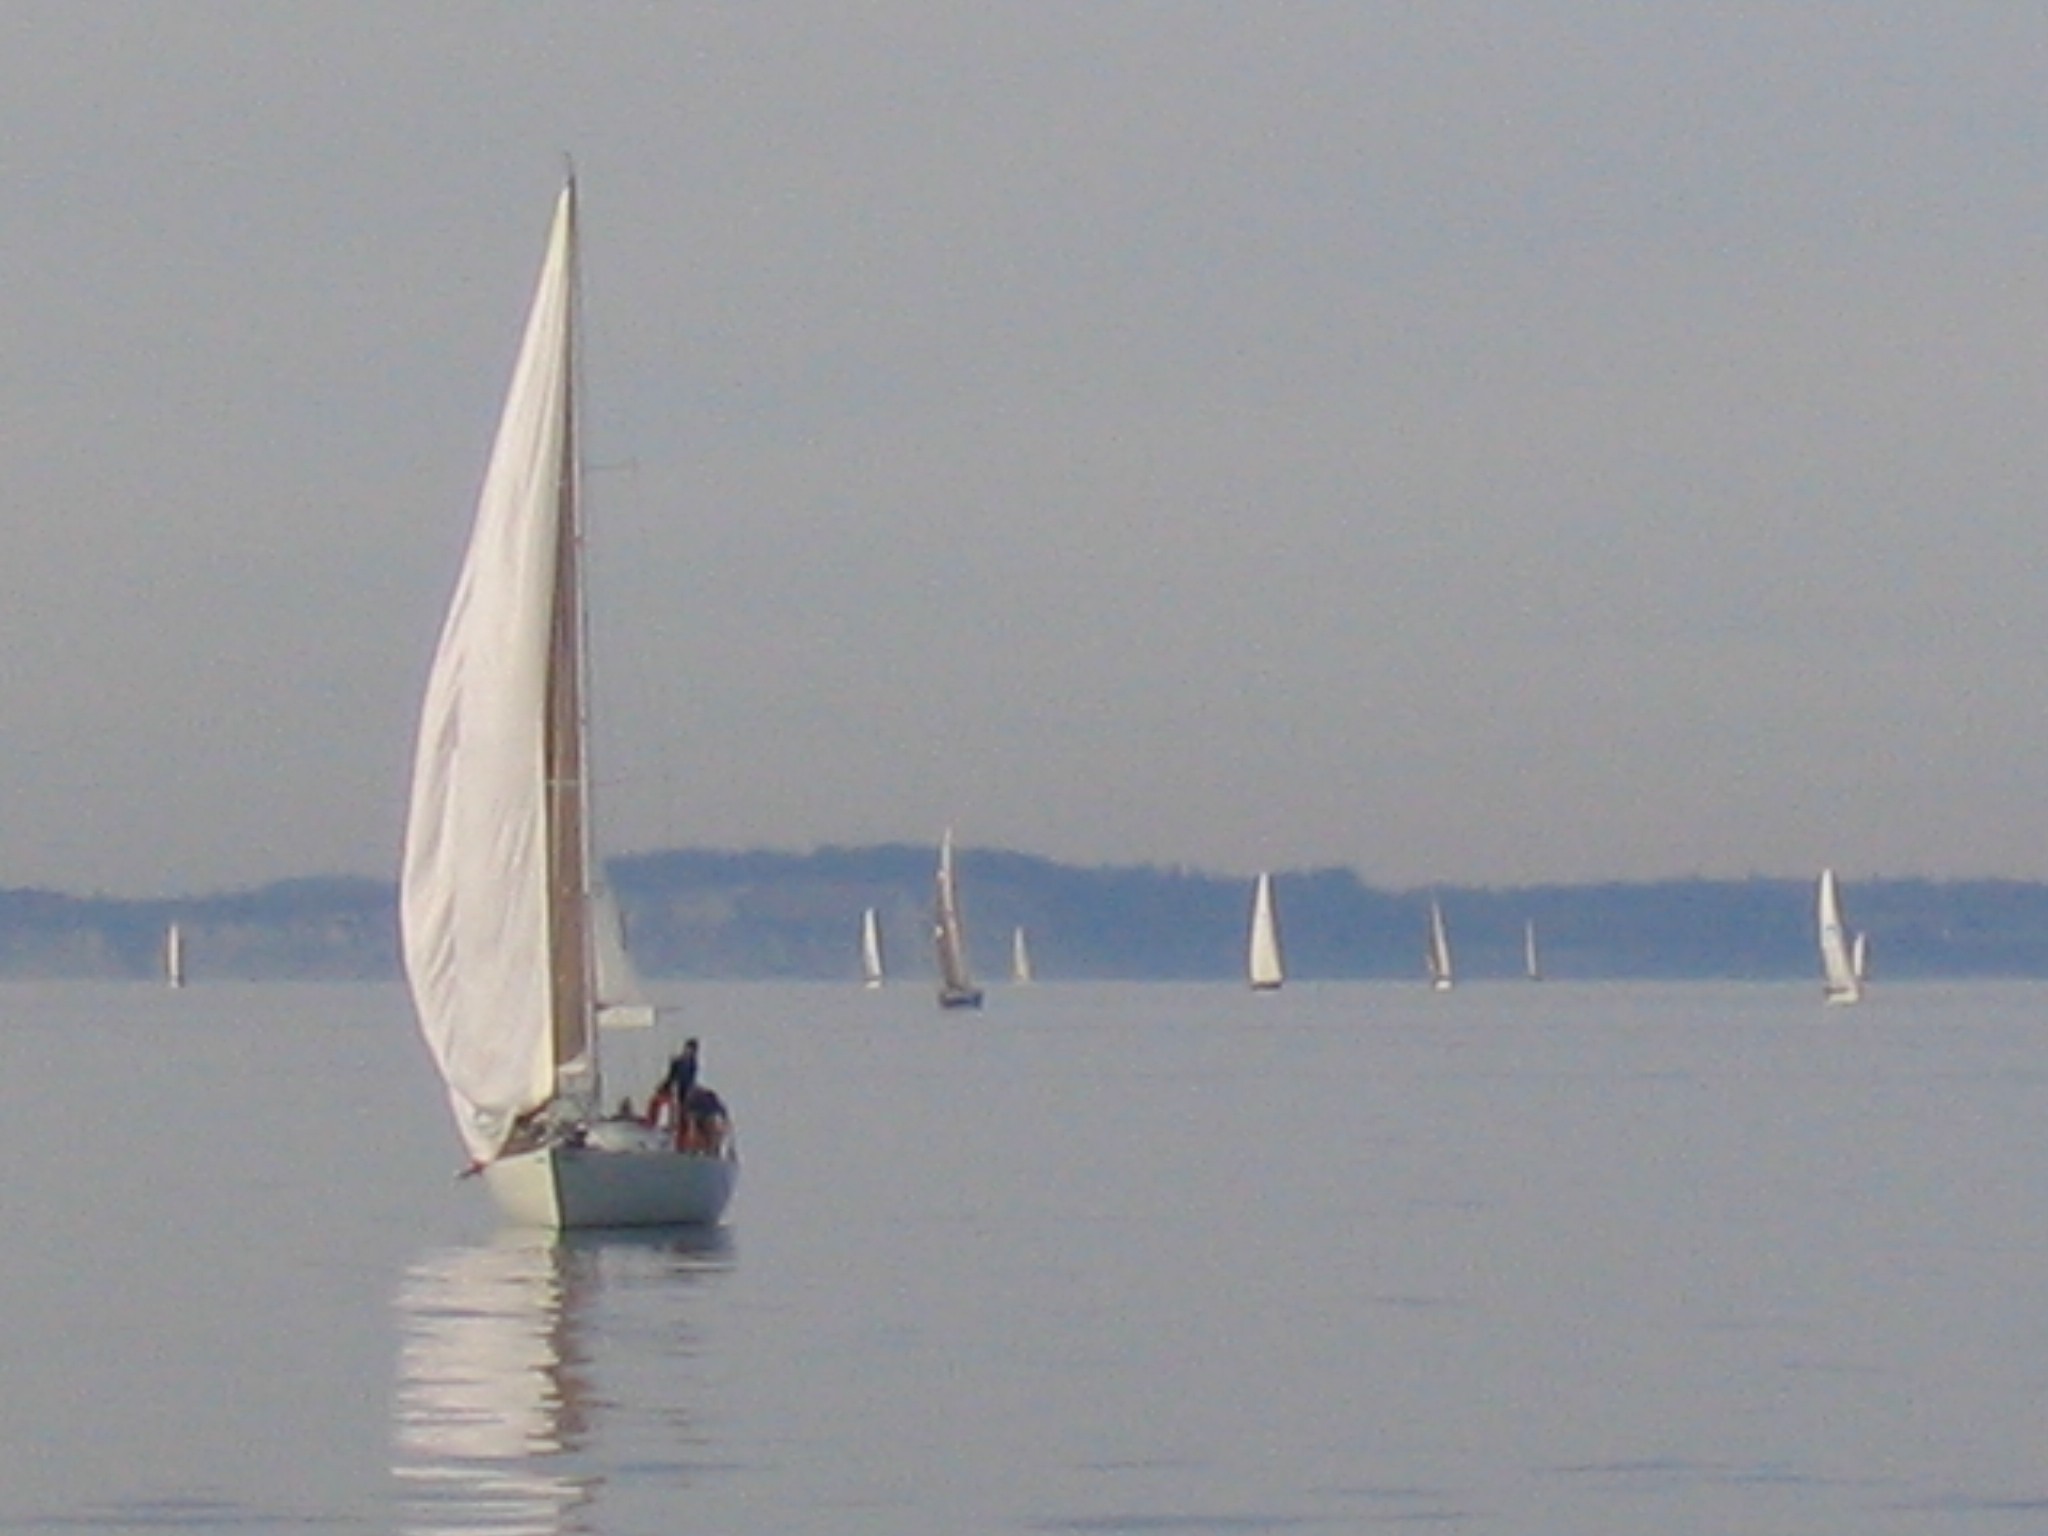 two people riding on the back of a sailboat in a large body of water